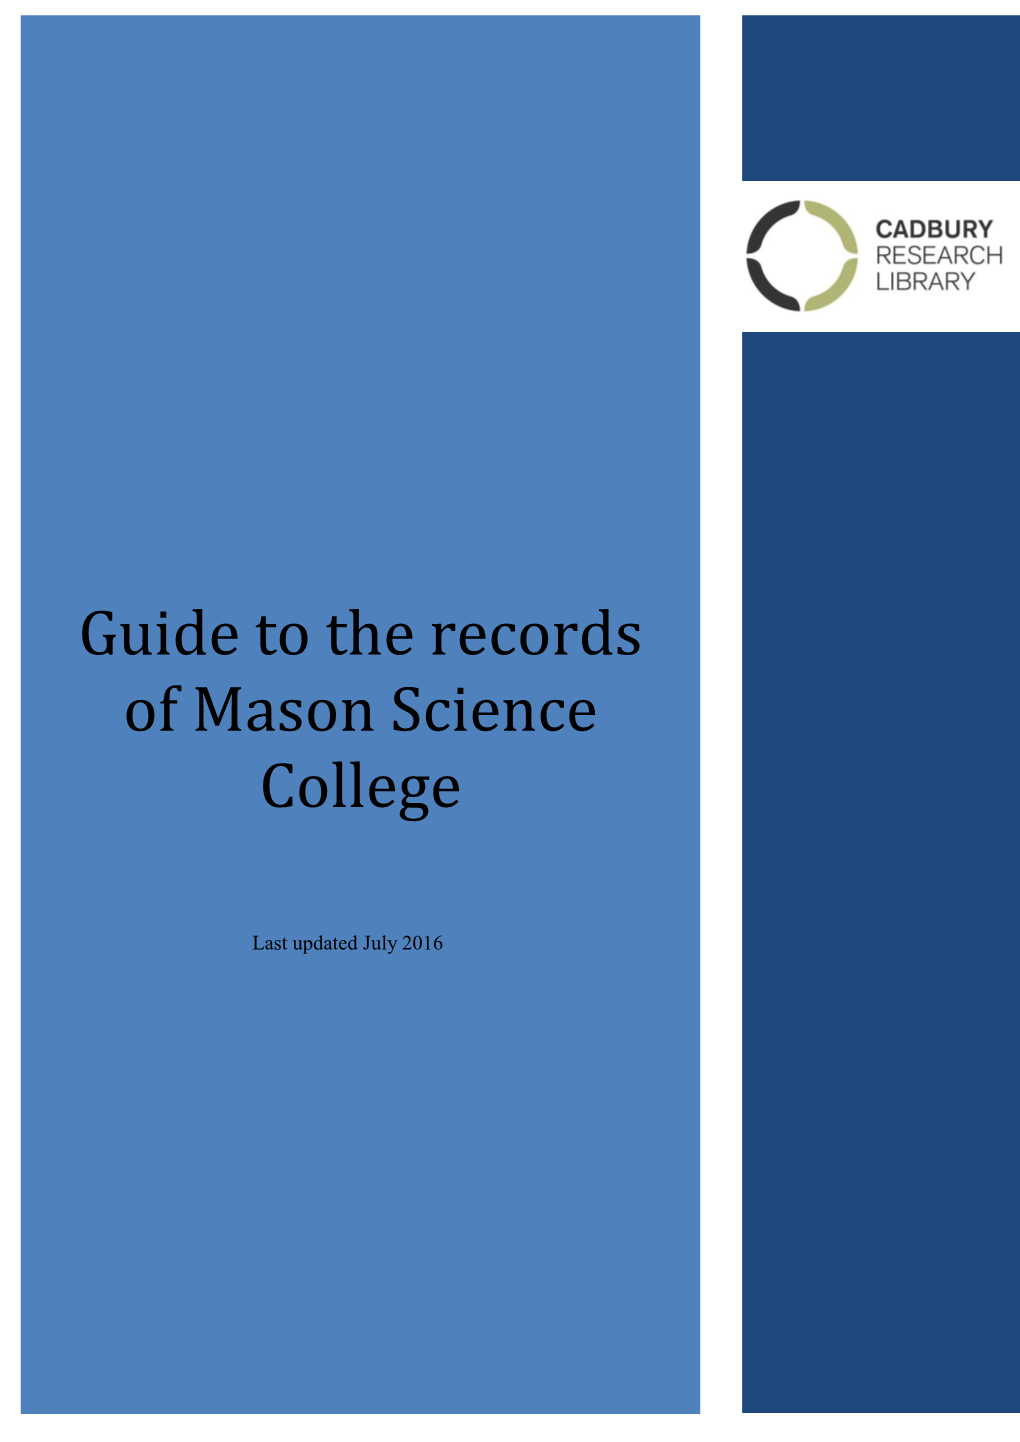 Guide to the Records of Mason Science College